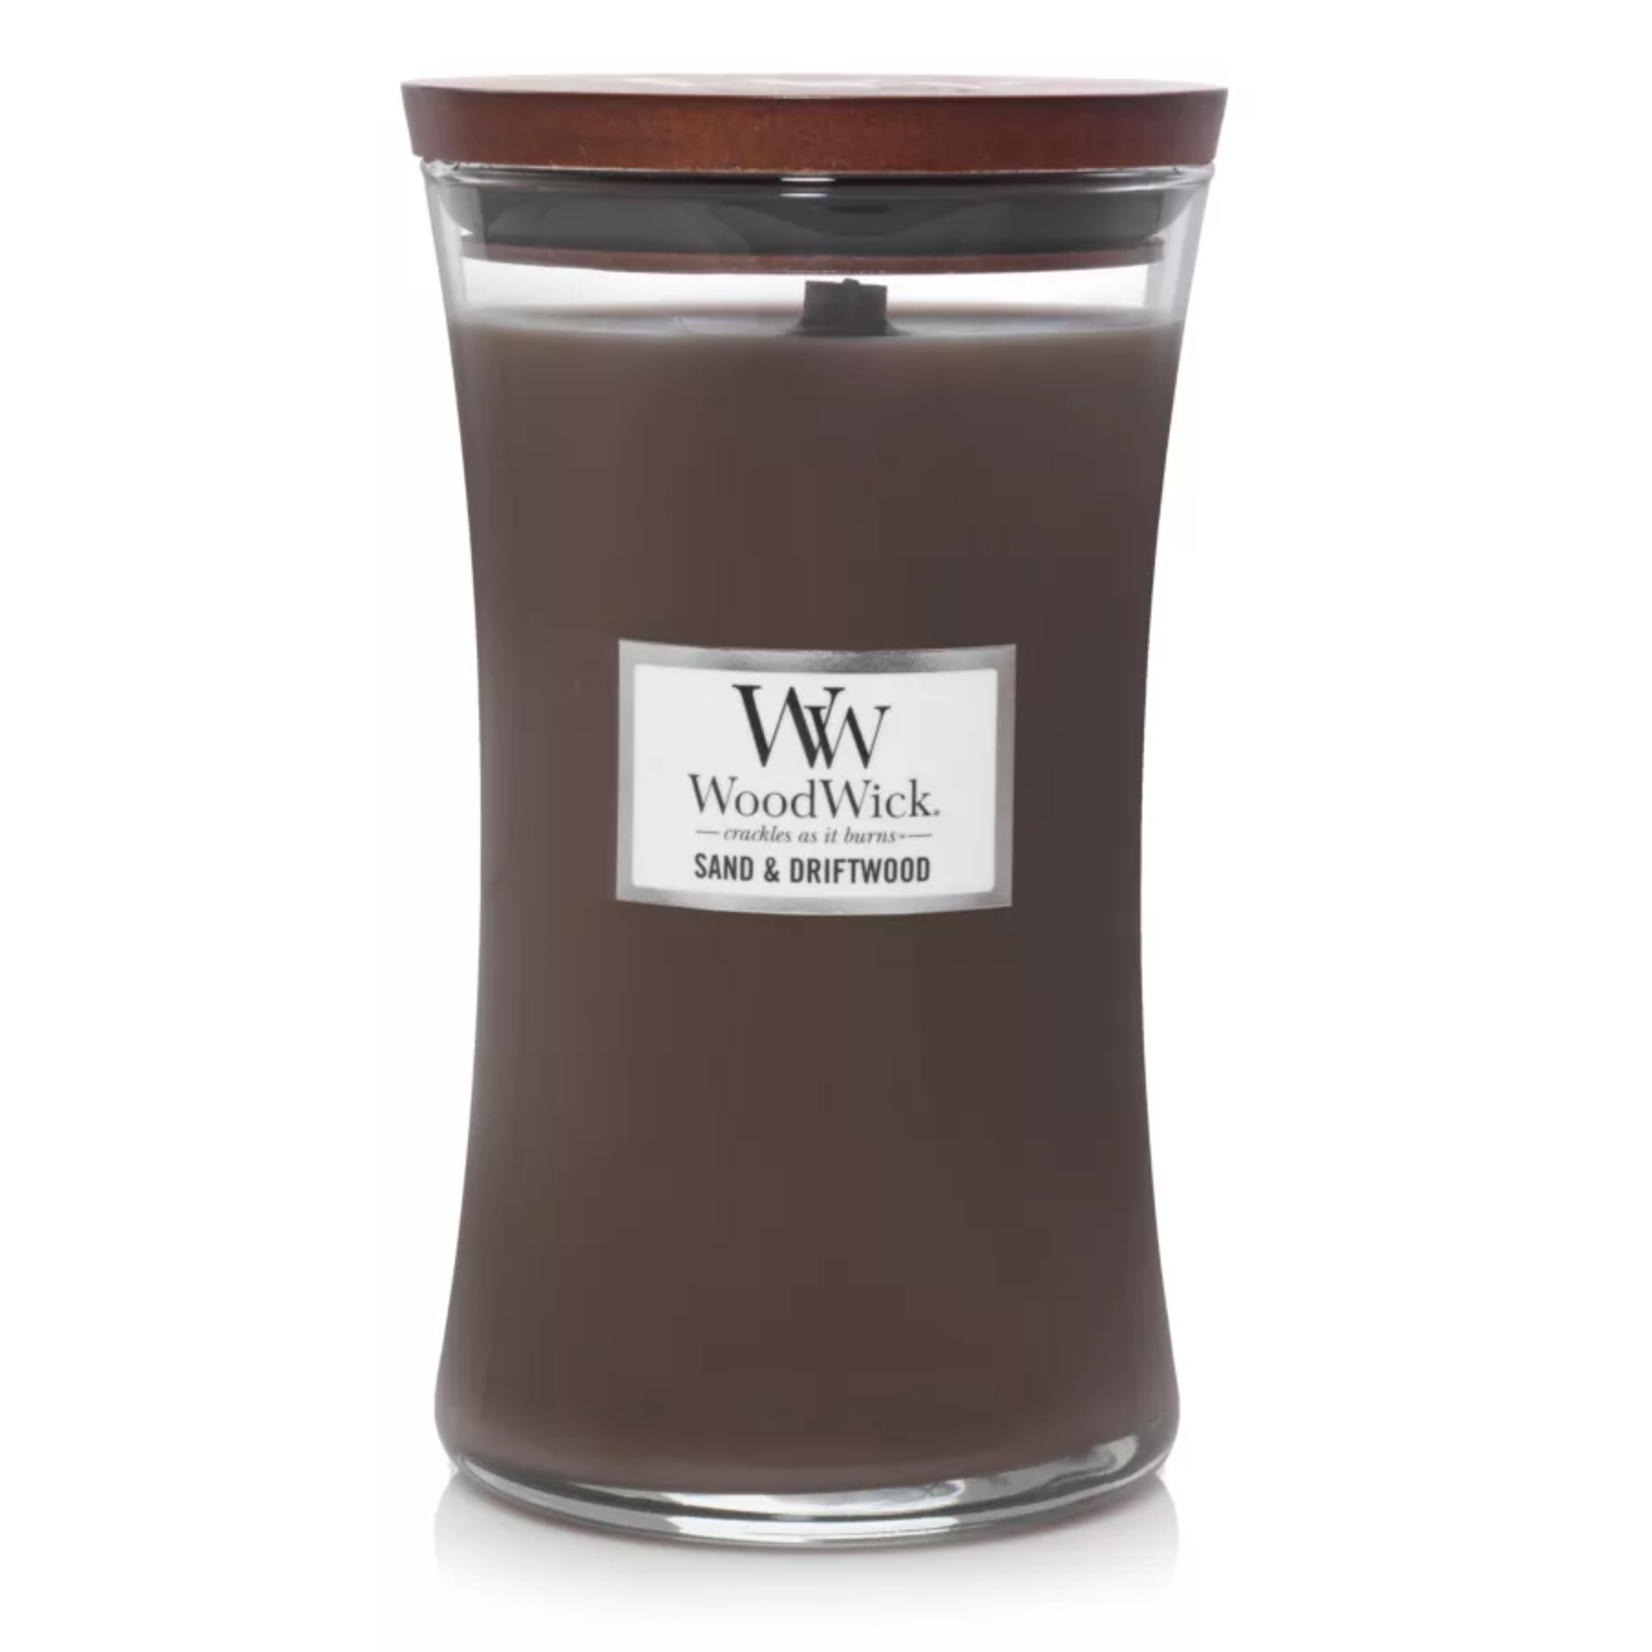 Woodwick Candle - Sand & Driftwood